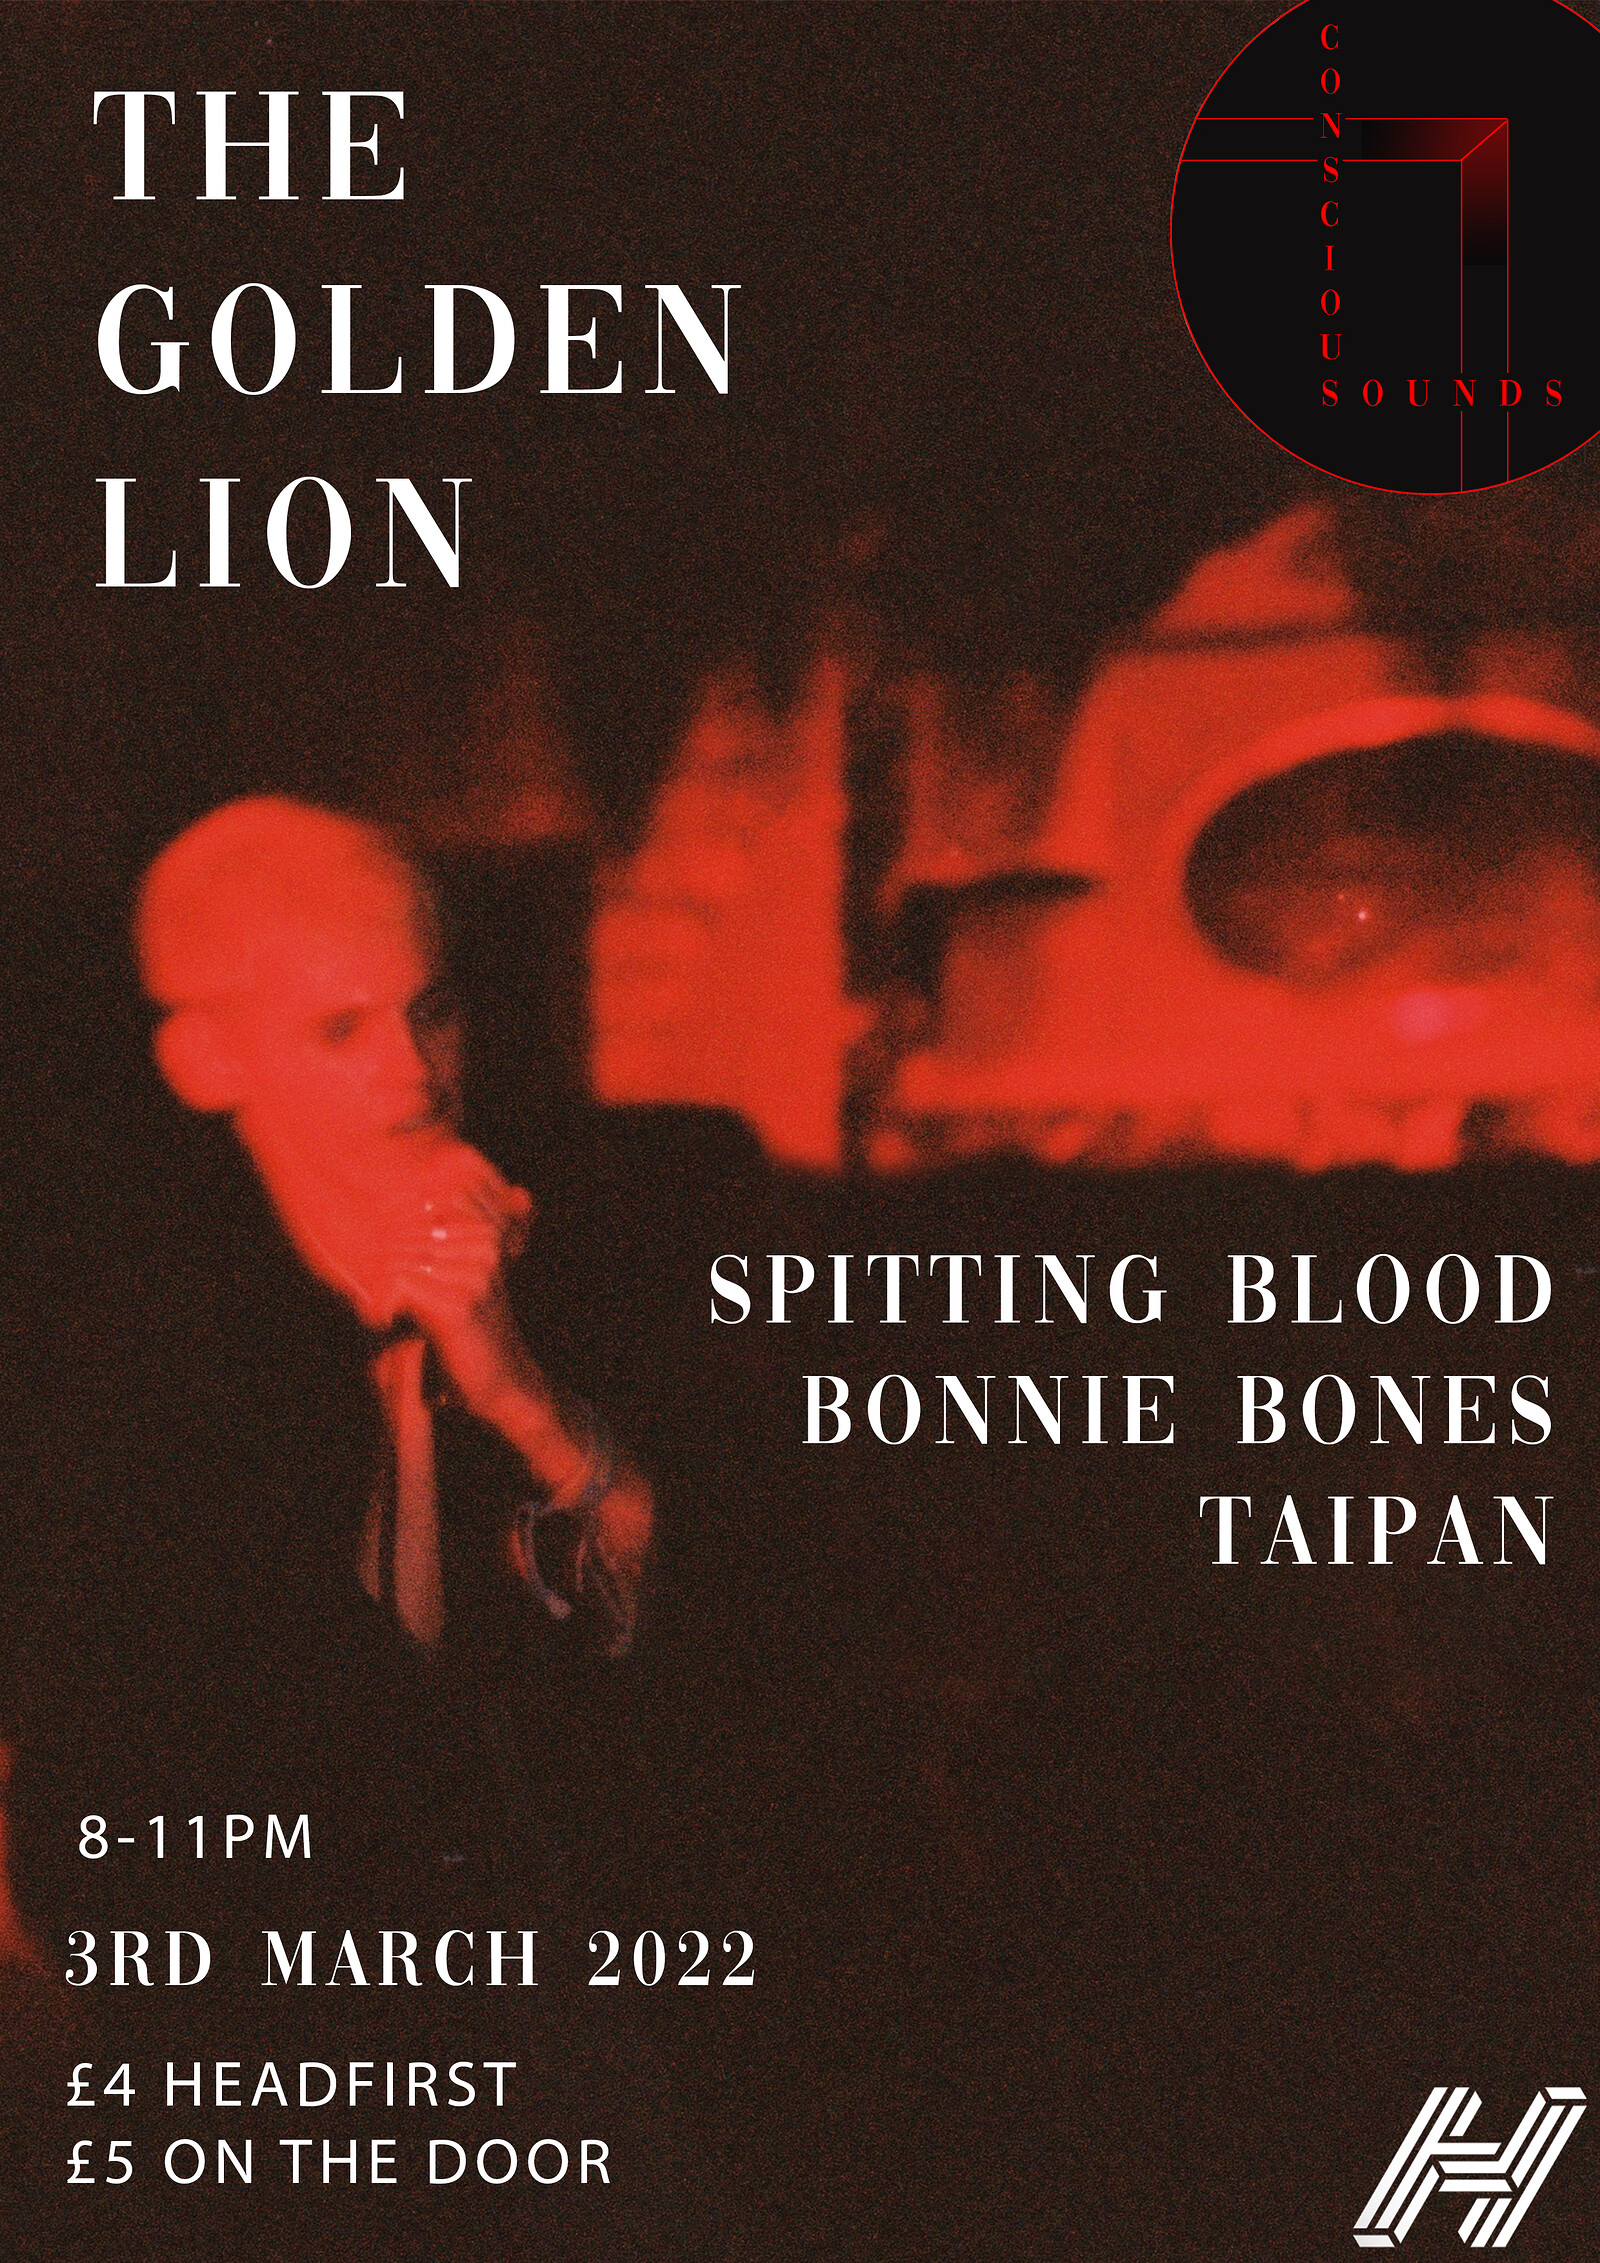 Conscious Sounds Presents- Spitting Blood at The Golden Lion